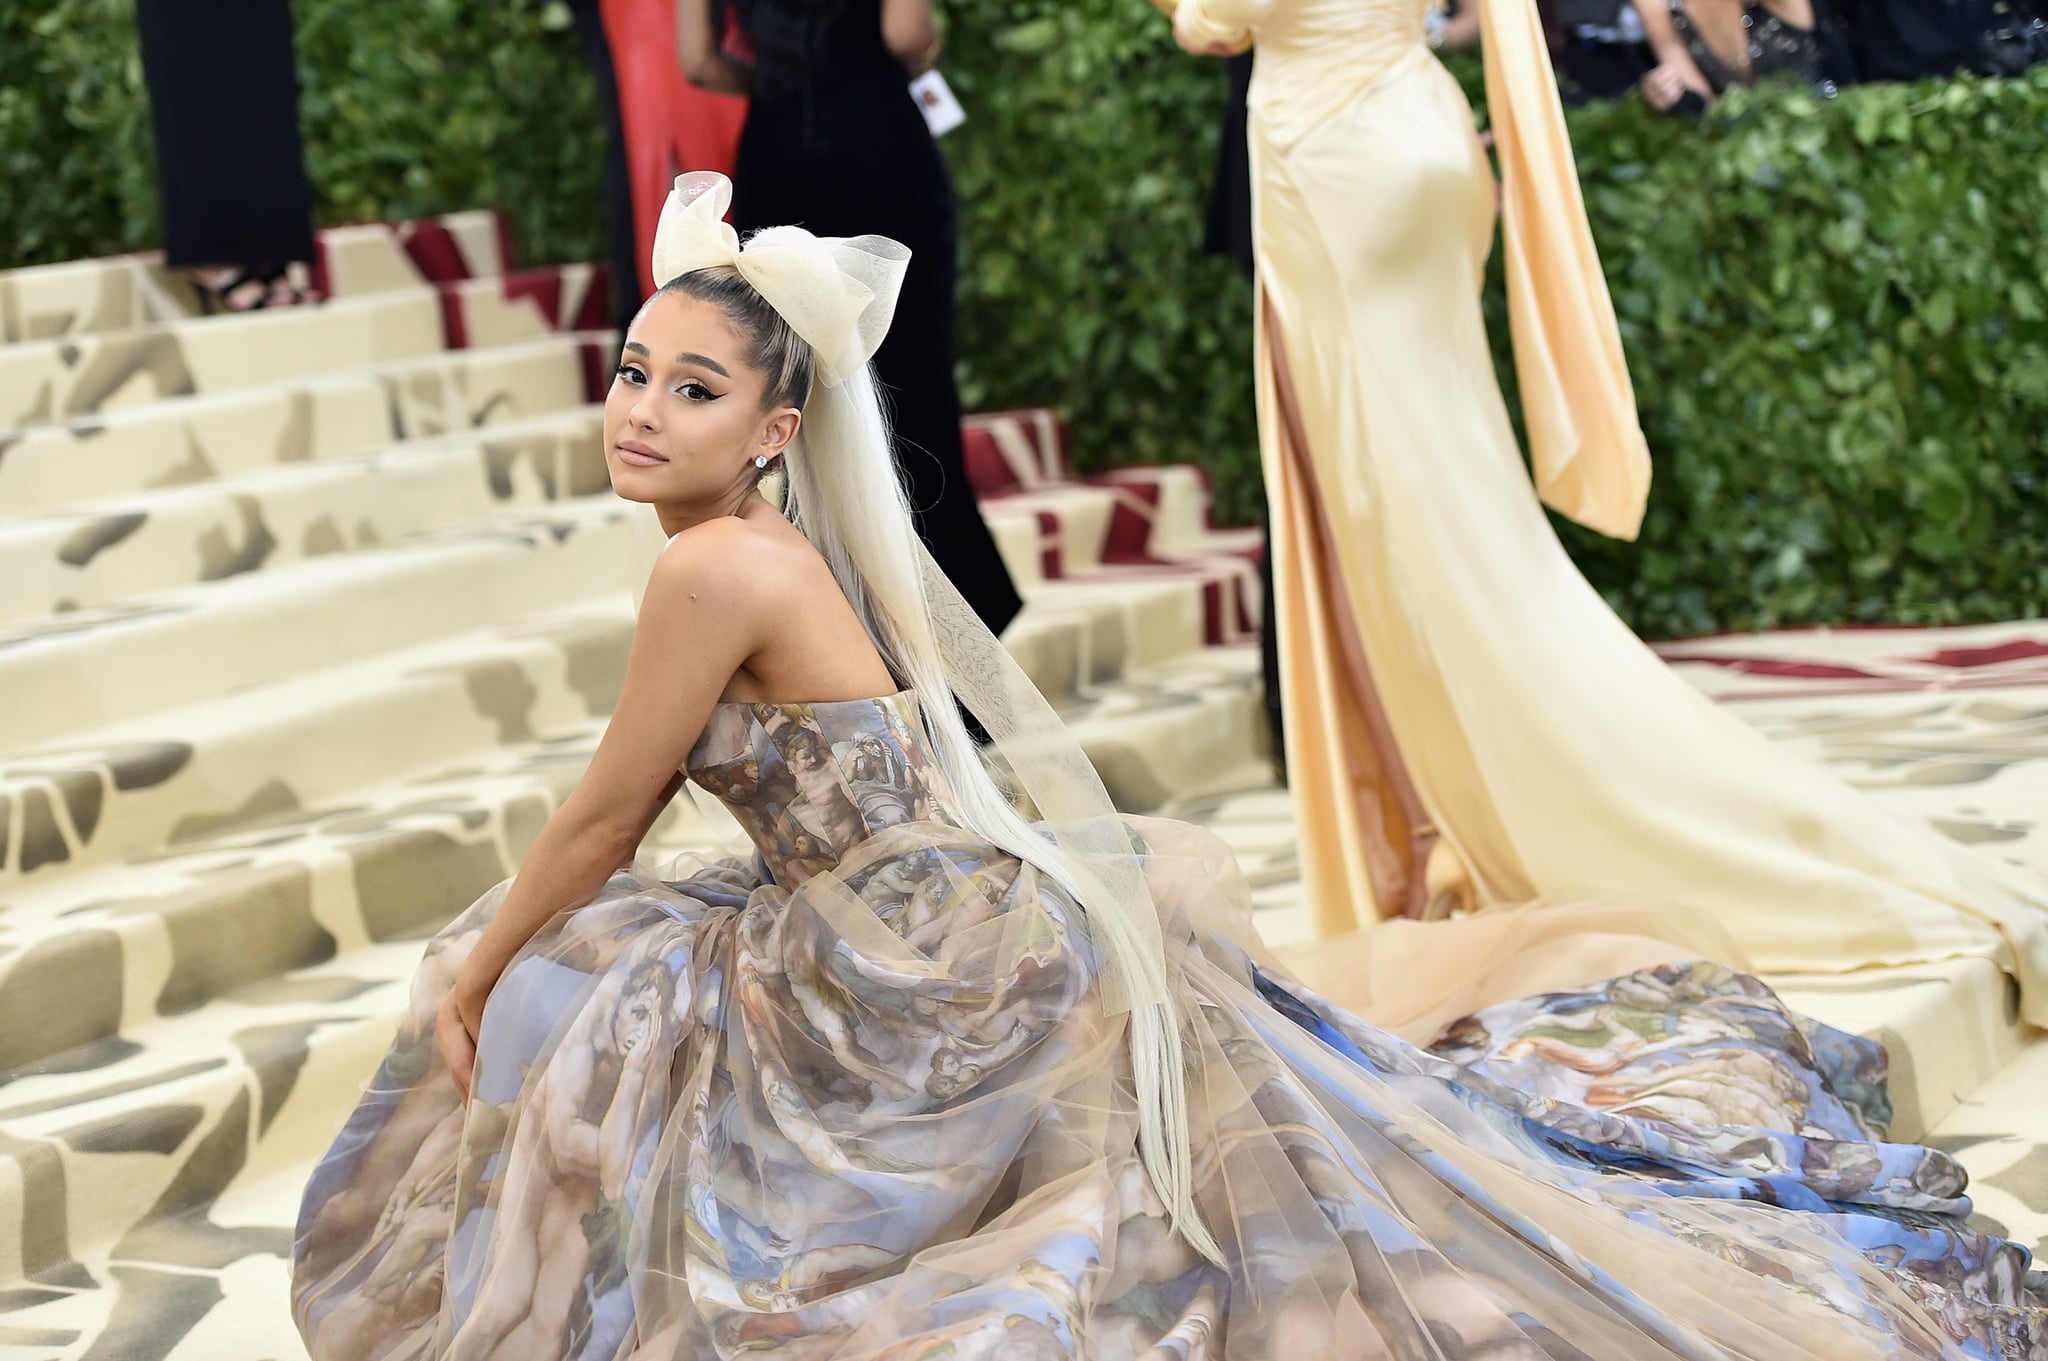 NEW YORK, NY - MAY 07:  Ariana Grande attends the Heavenly Bodies: Fashion & The Catholic Imagination Costume Institute Gala at The Metropolitan Museum of Art on May 7, 2018 in New York City.  (Photo by Jason Kempin/Getty Images)